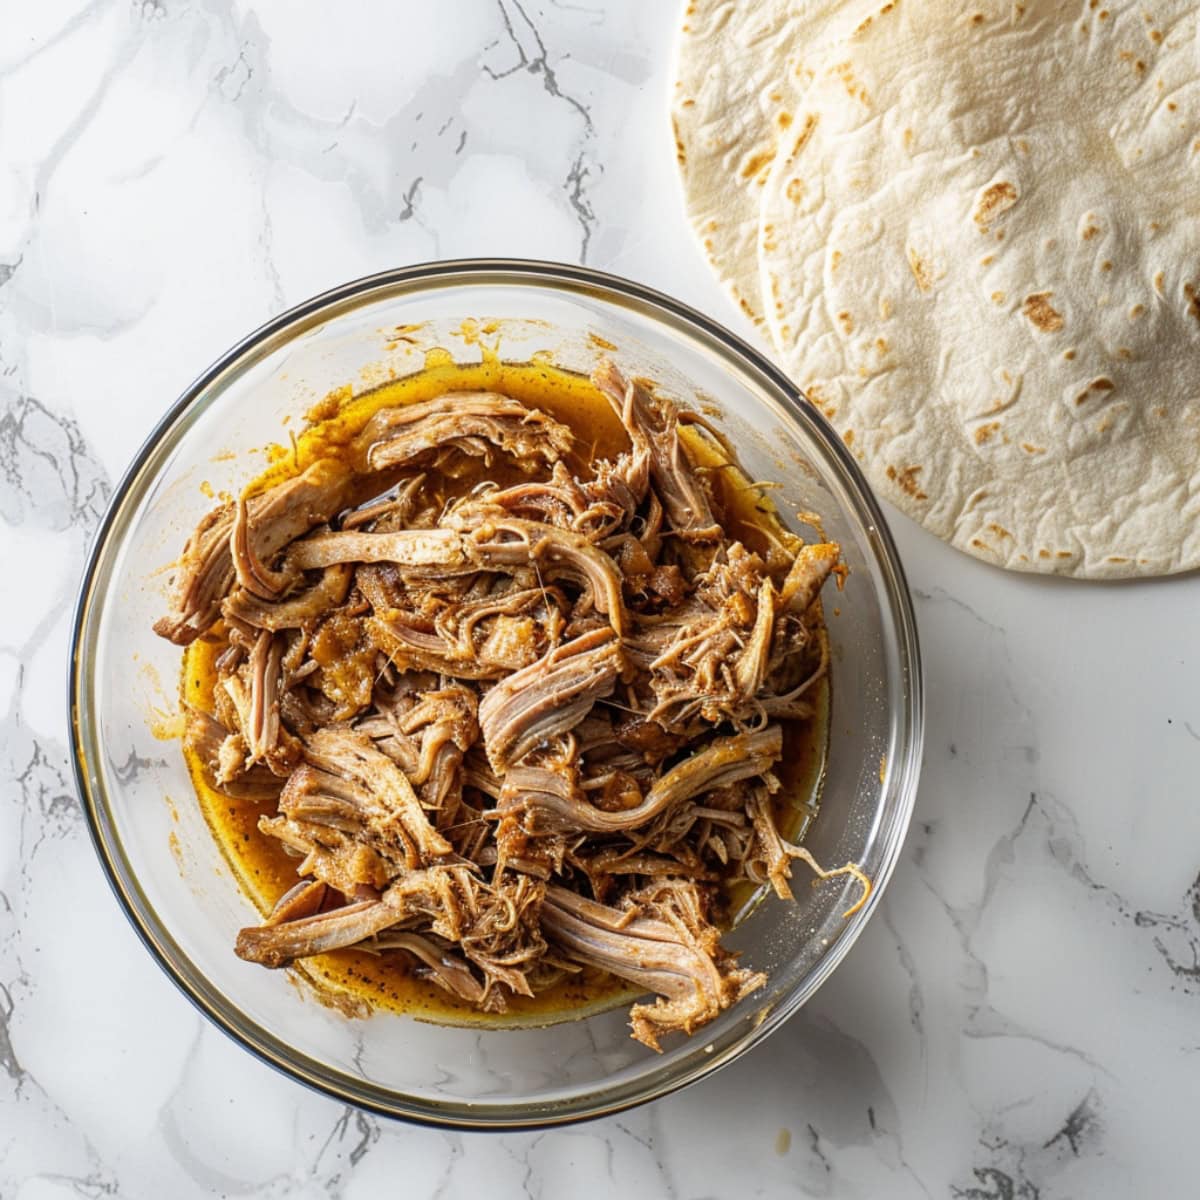 Pulled pork in a glass bowl, corn tortillas on its side. 